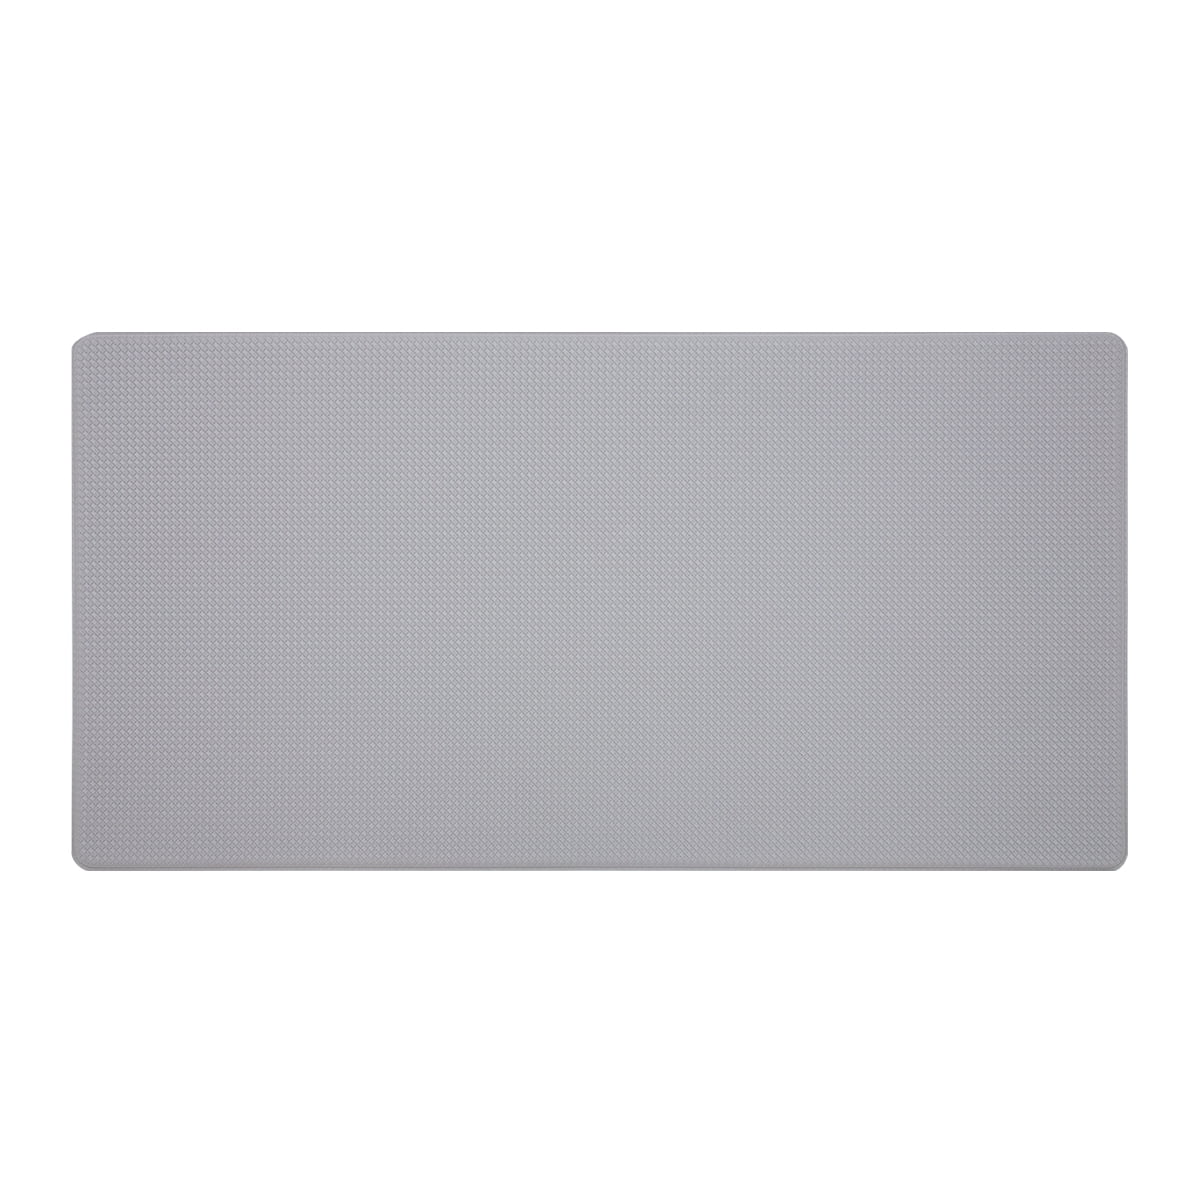 Deluxe Anti-Fatigue Kitchen Mats 39x20 Oil and Stain Resistant with  Strong Fabric, Stylish Chef Mat Match Every Corner